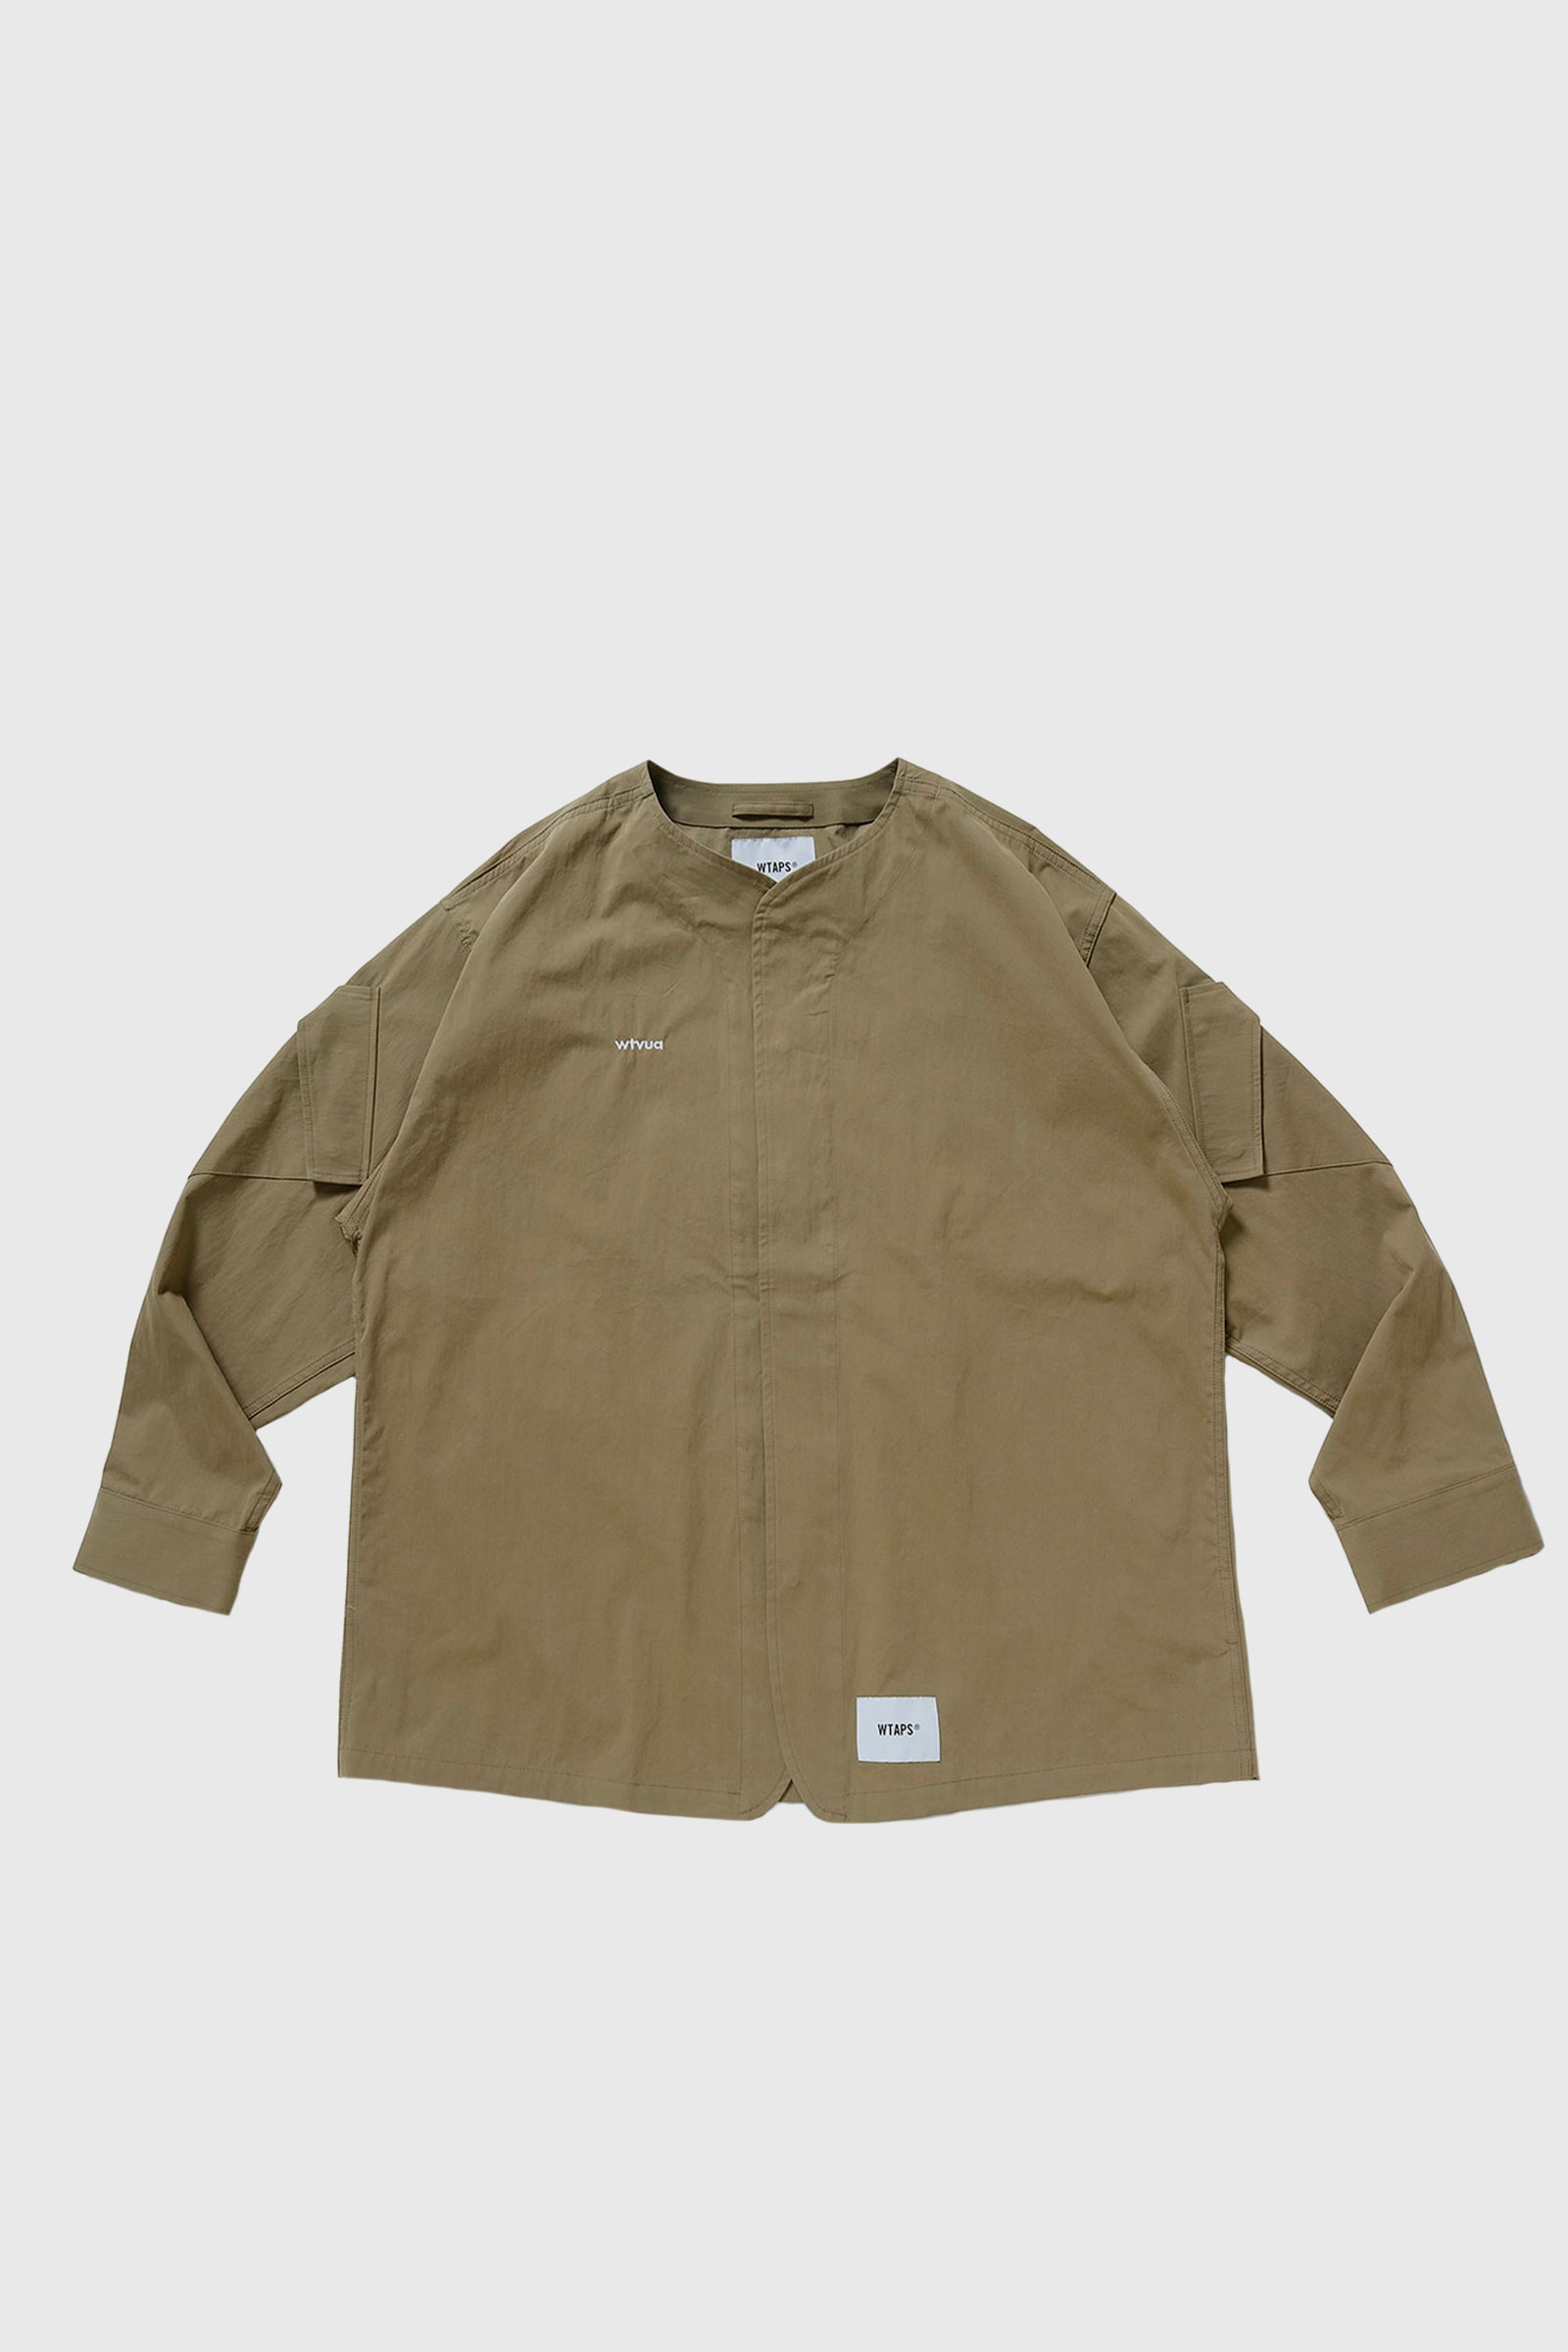 WTAPS  SCOUT / LS / NYCO. TUSSAH